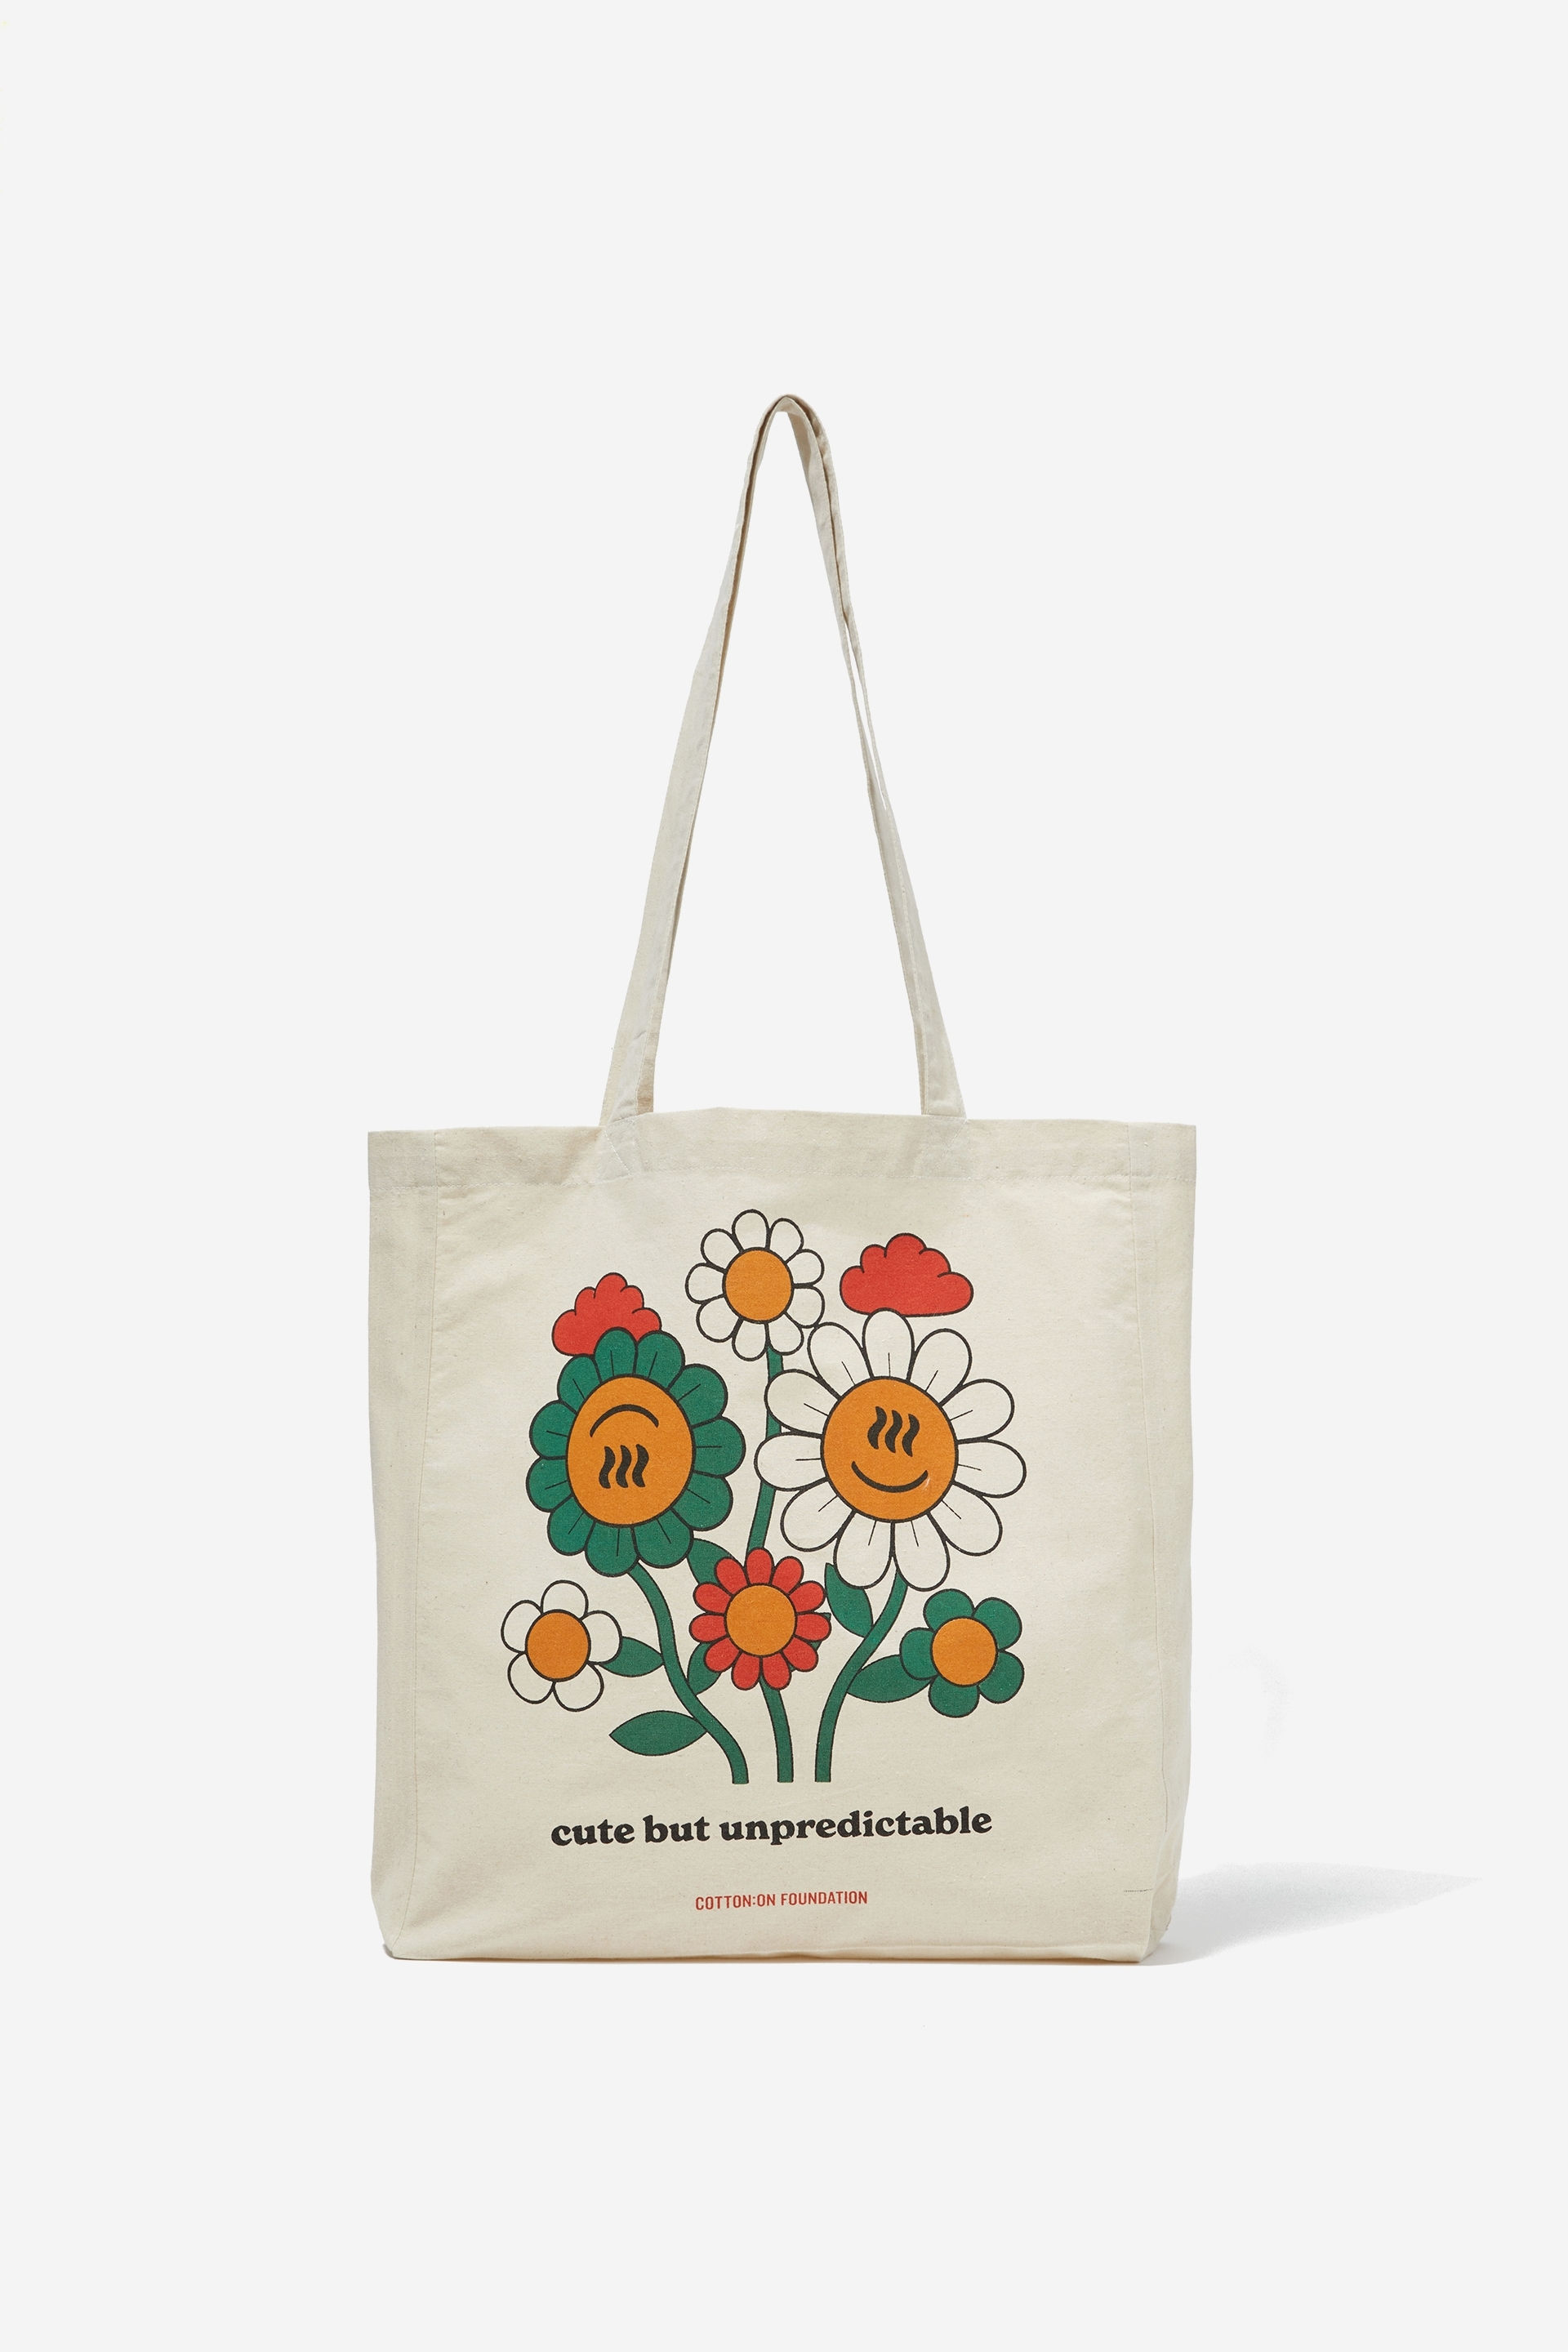 Foundation Typo Recycled Tote Bag